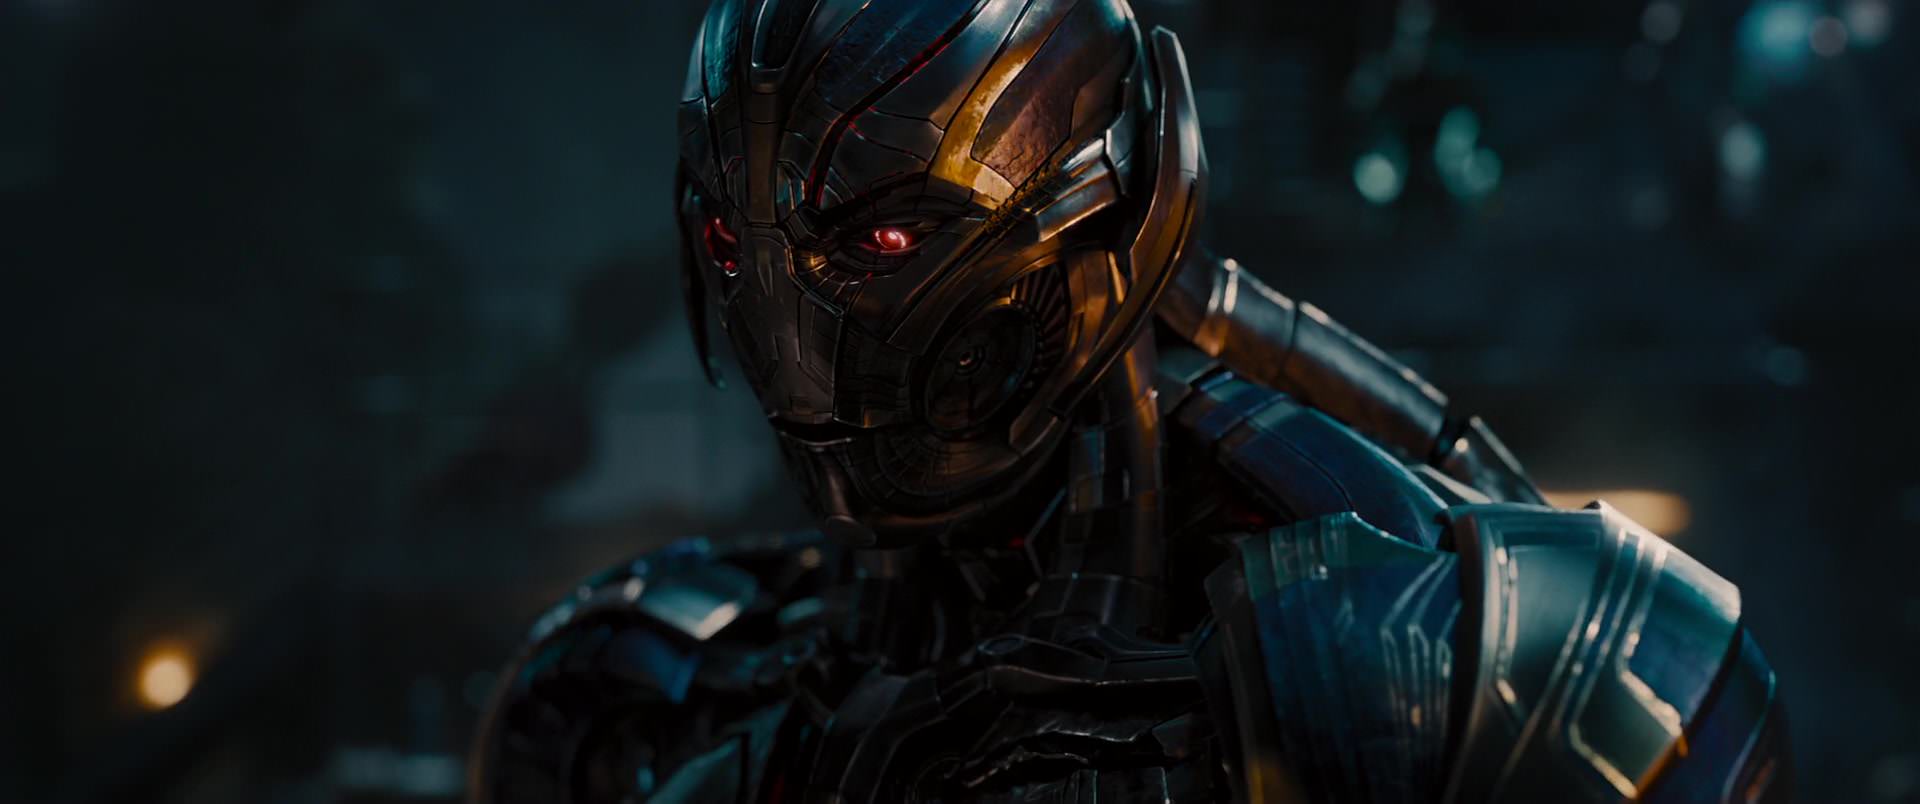 avengers age of ultron full movie in hindi download 720p openload